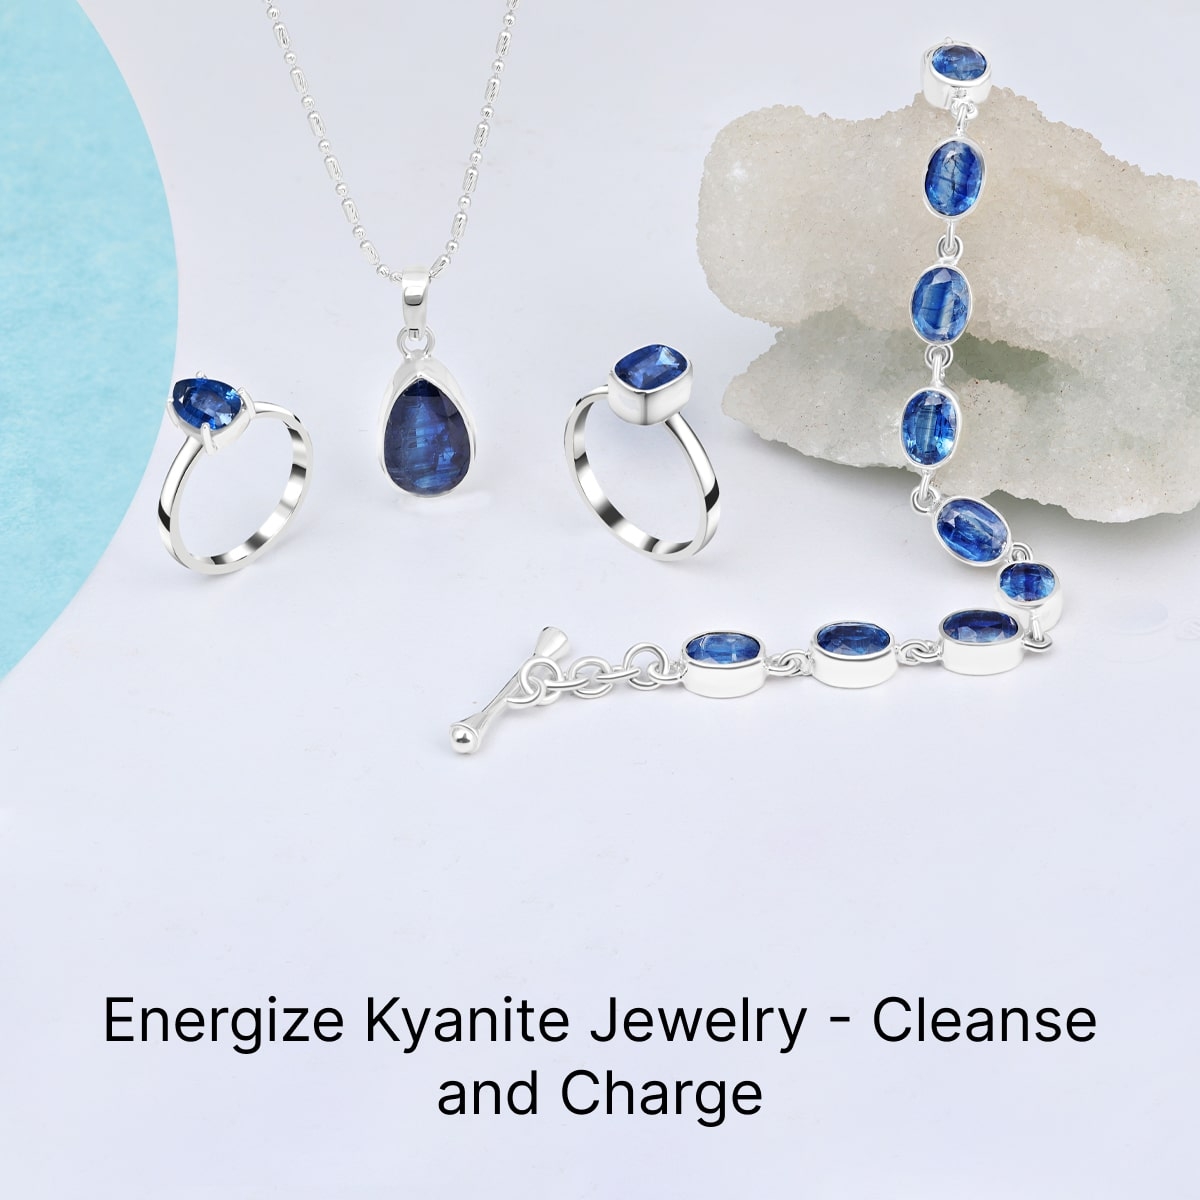 Revitalizing Your Kyanite Jewelry by Cleansing and Charging